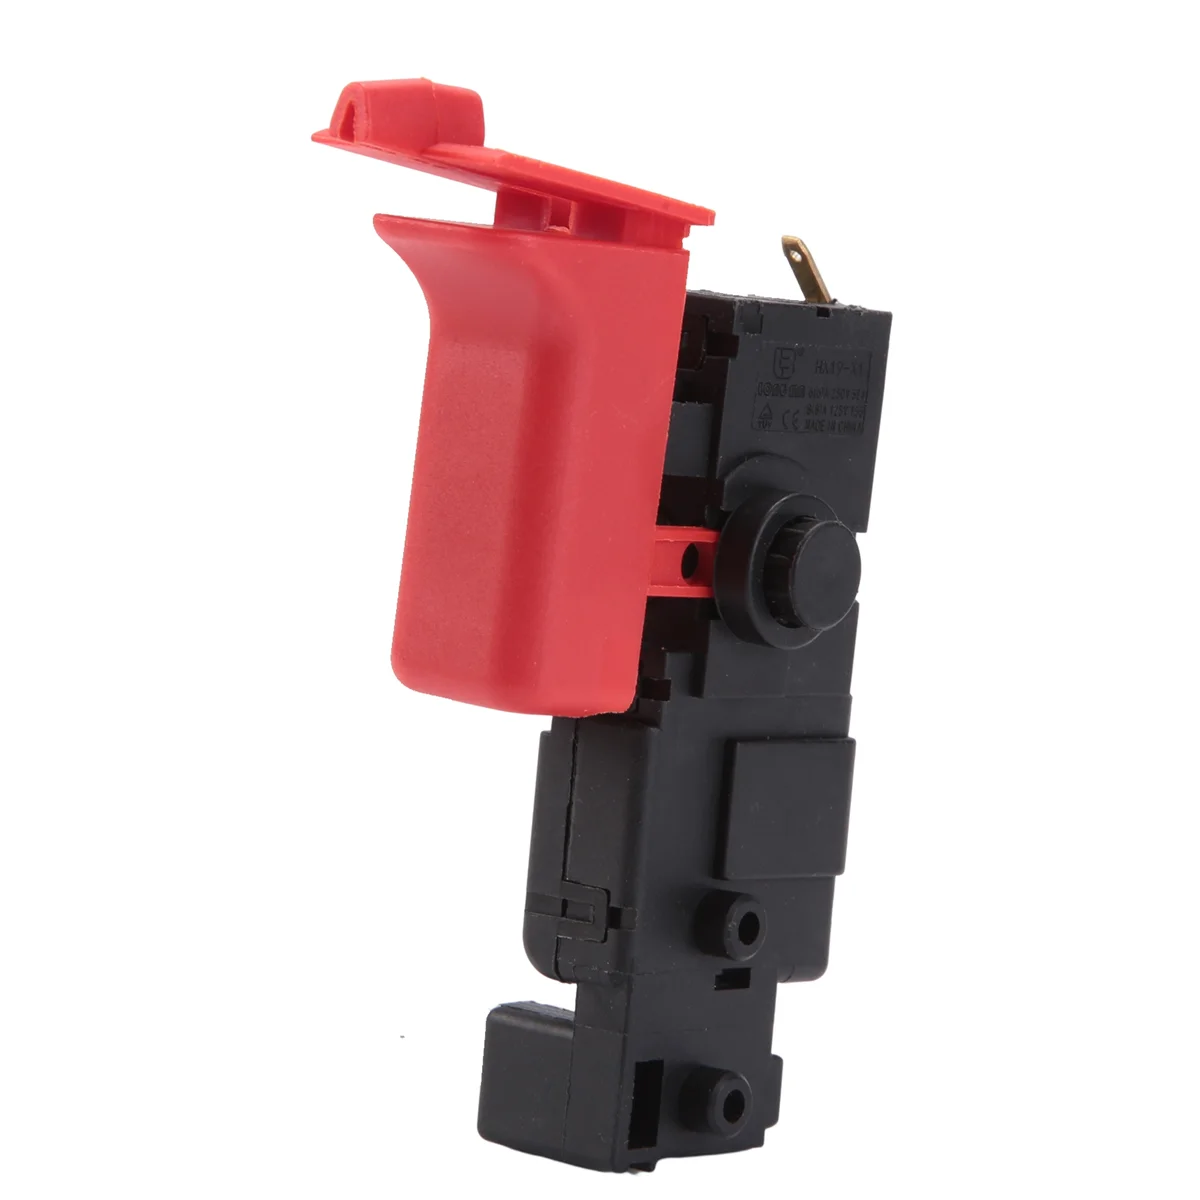 

Electric Hammer Drill Switch for GBH2-26DE GBH2-26DFR GBH 2-26E GBH2-26DRE GBH2-26 RE